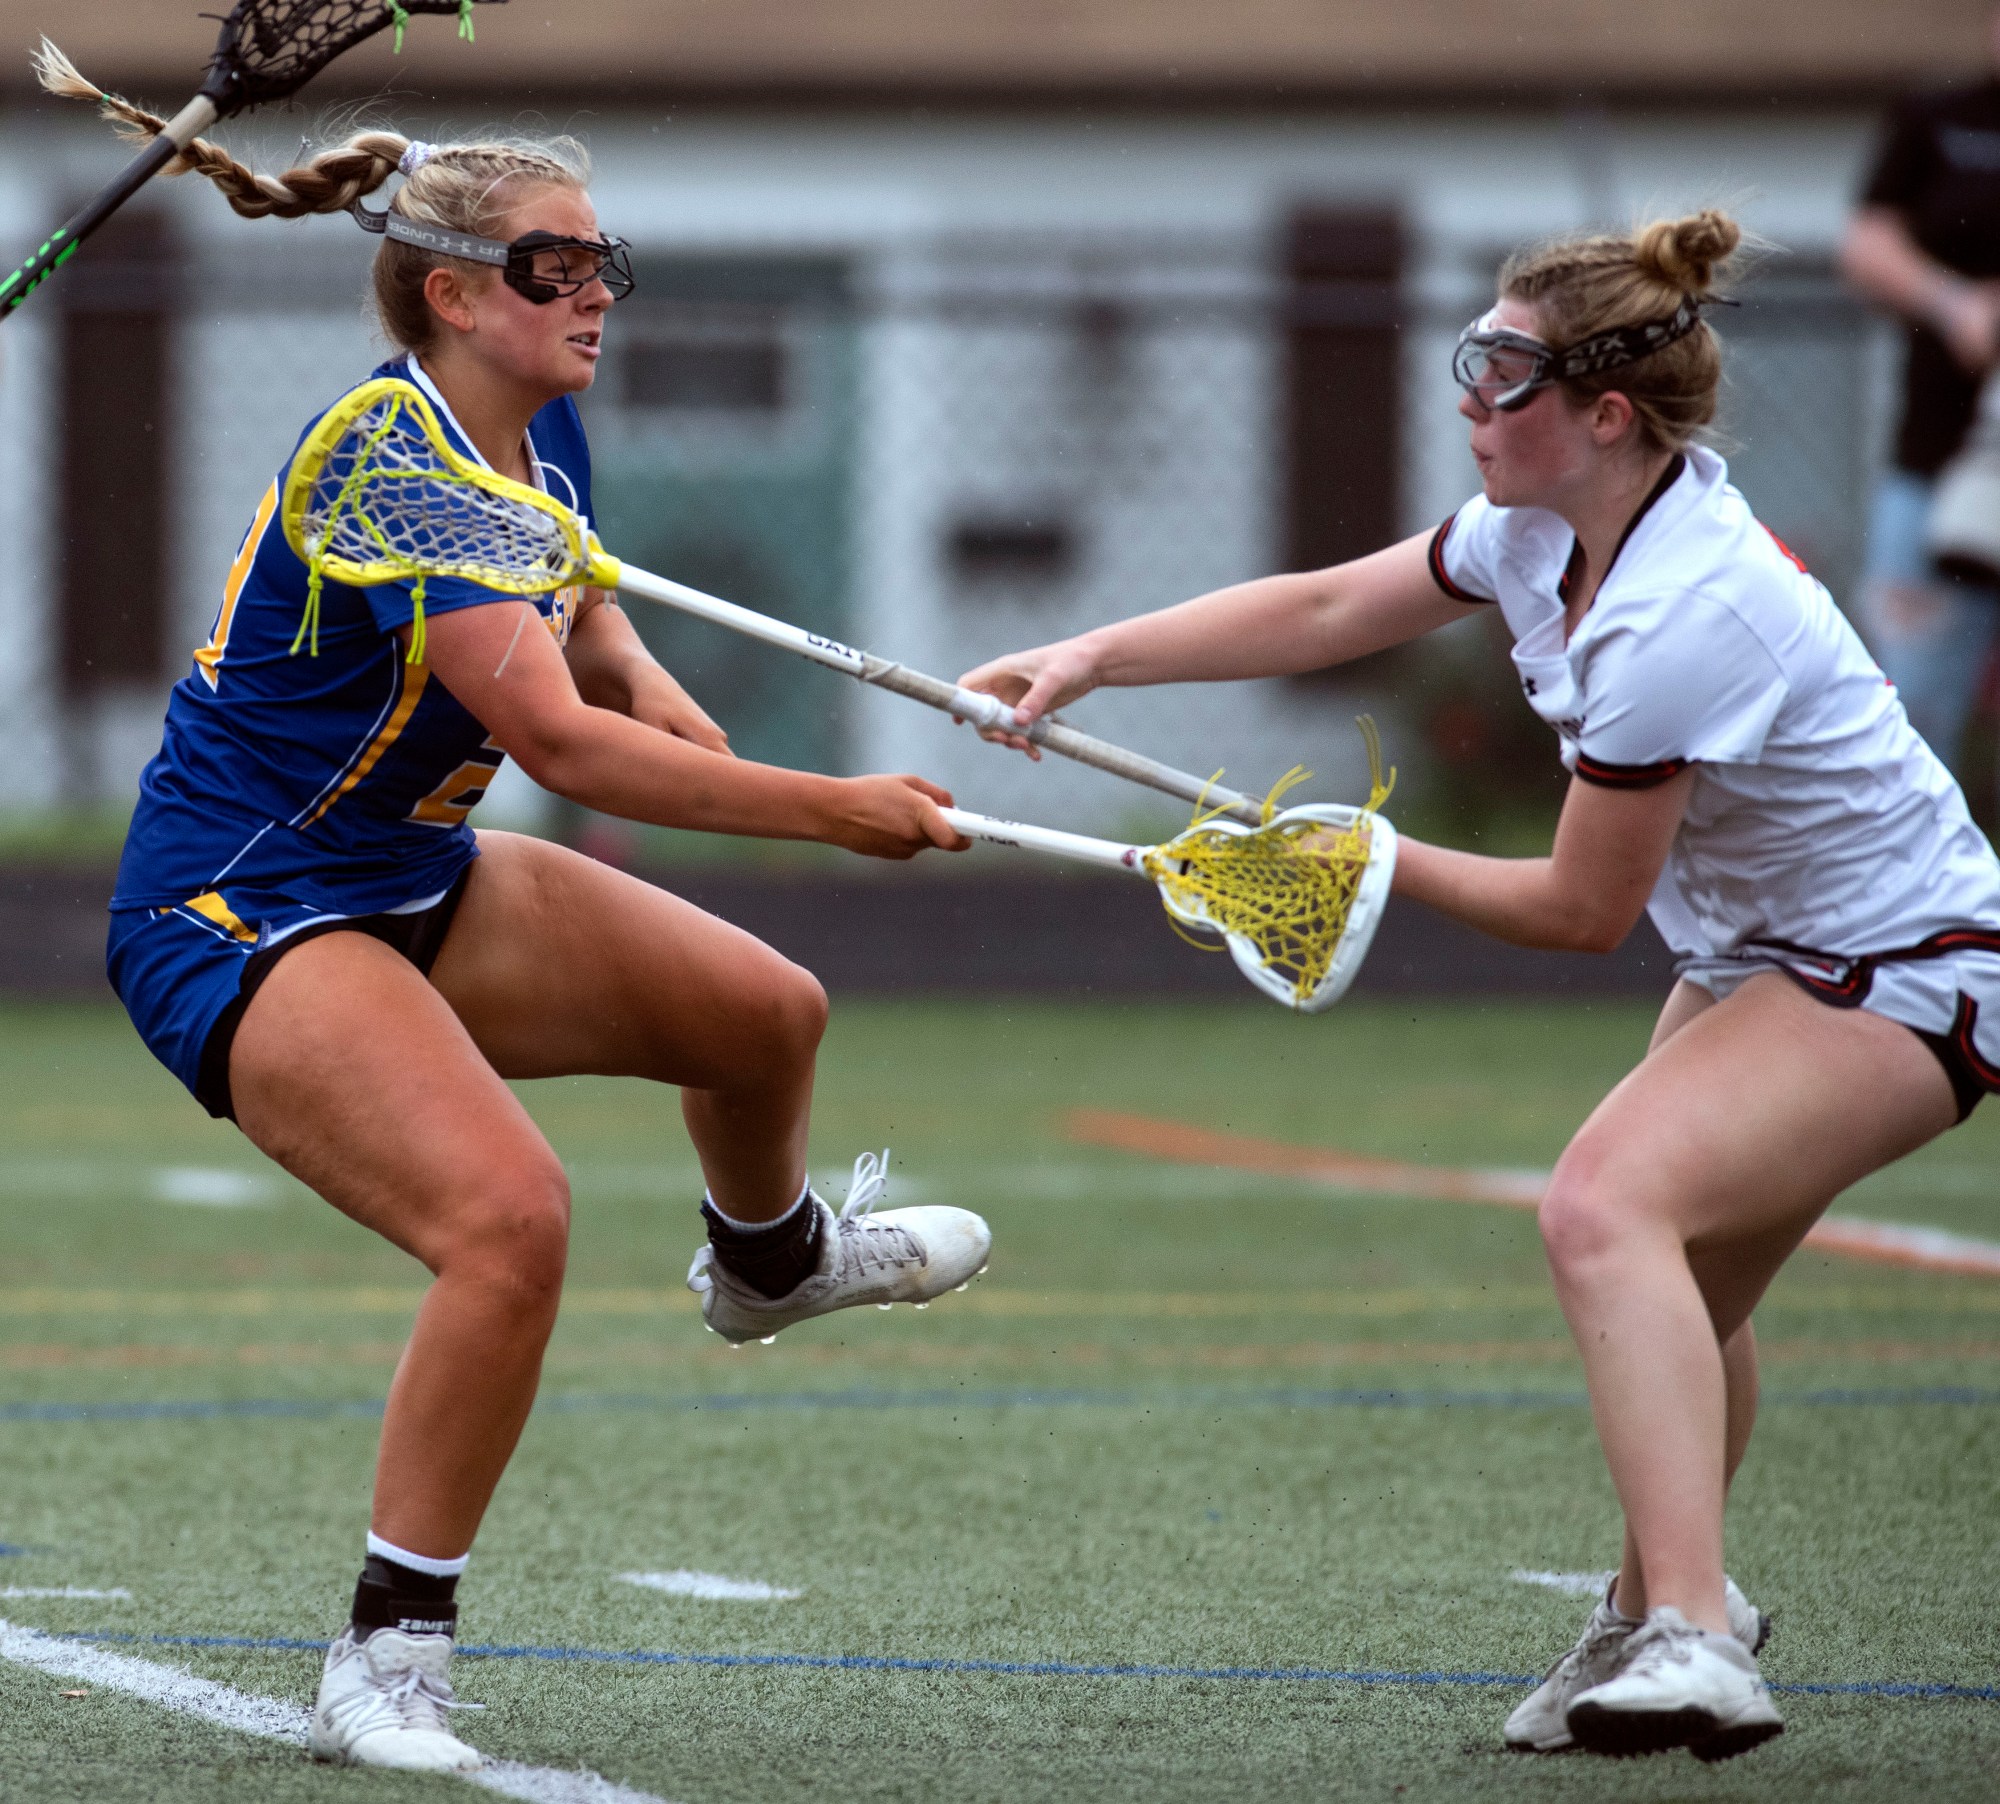 Southern's Emmie Mudd, left, shoots and scores against Middletown in the 1A Girls Lacrosse state semifinal at Glen Burnie High School. Southern won 12-10.(John Gillis/Freelance)